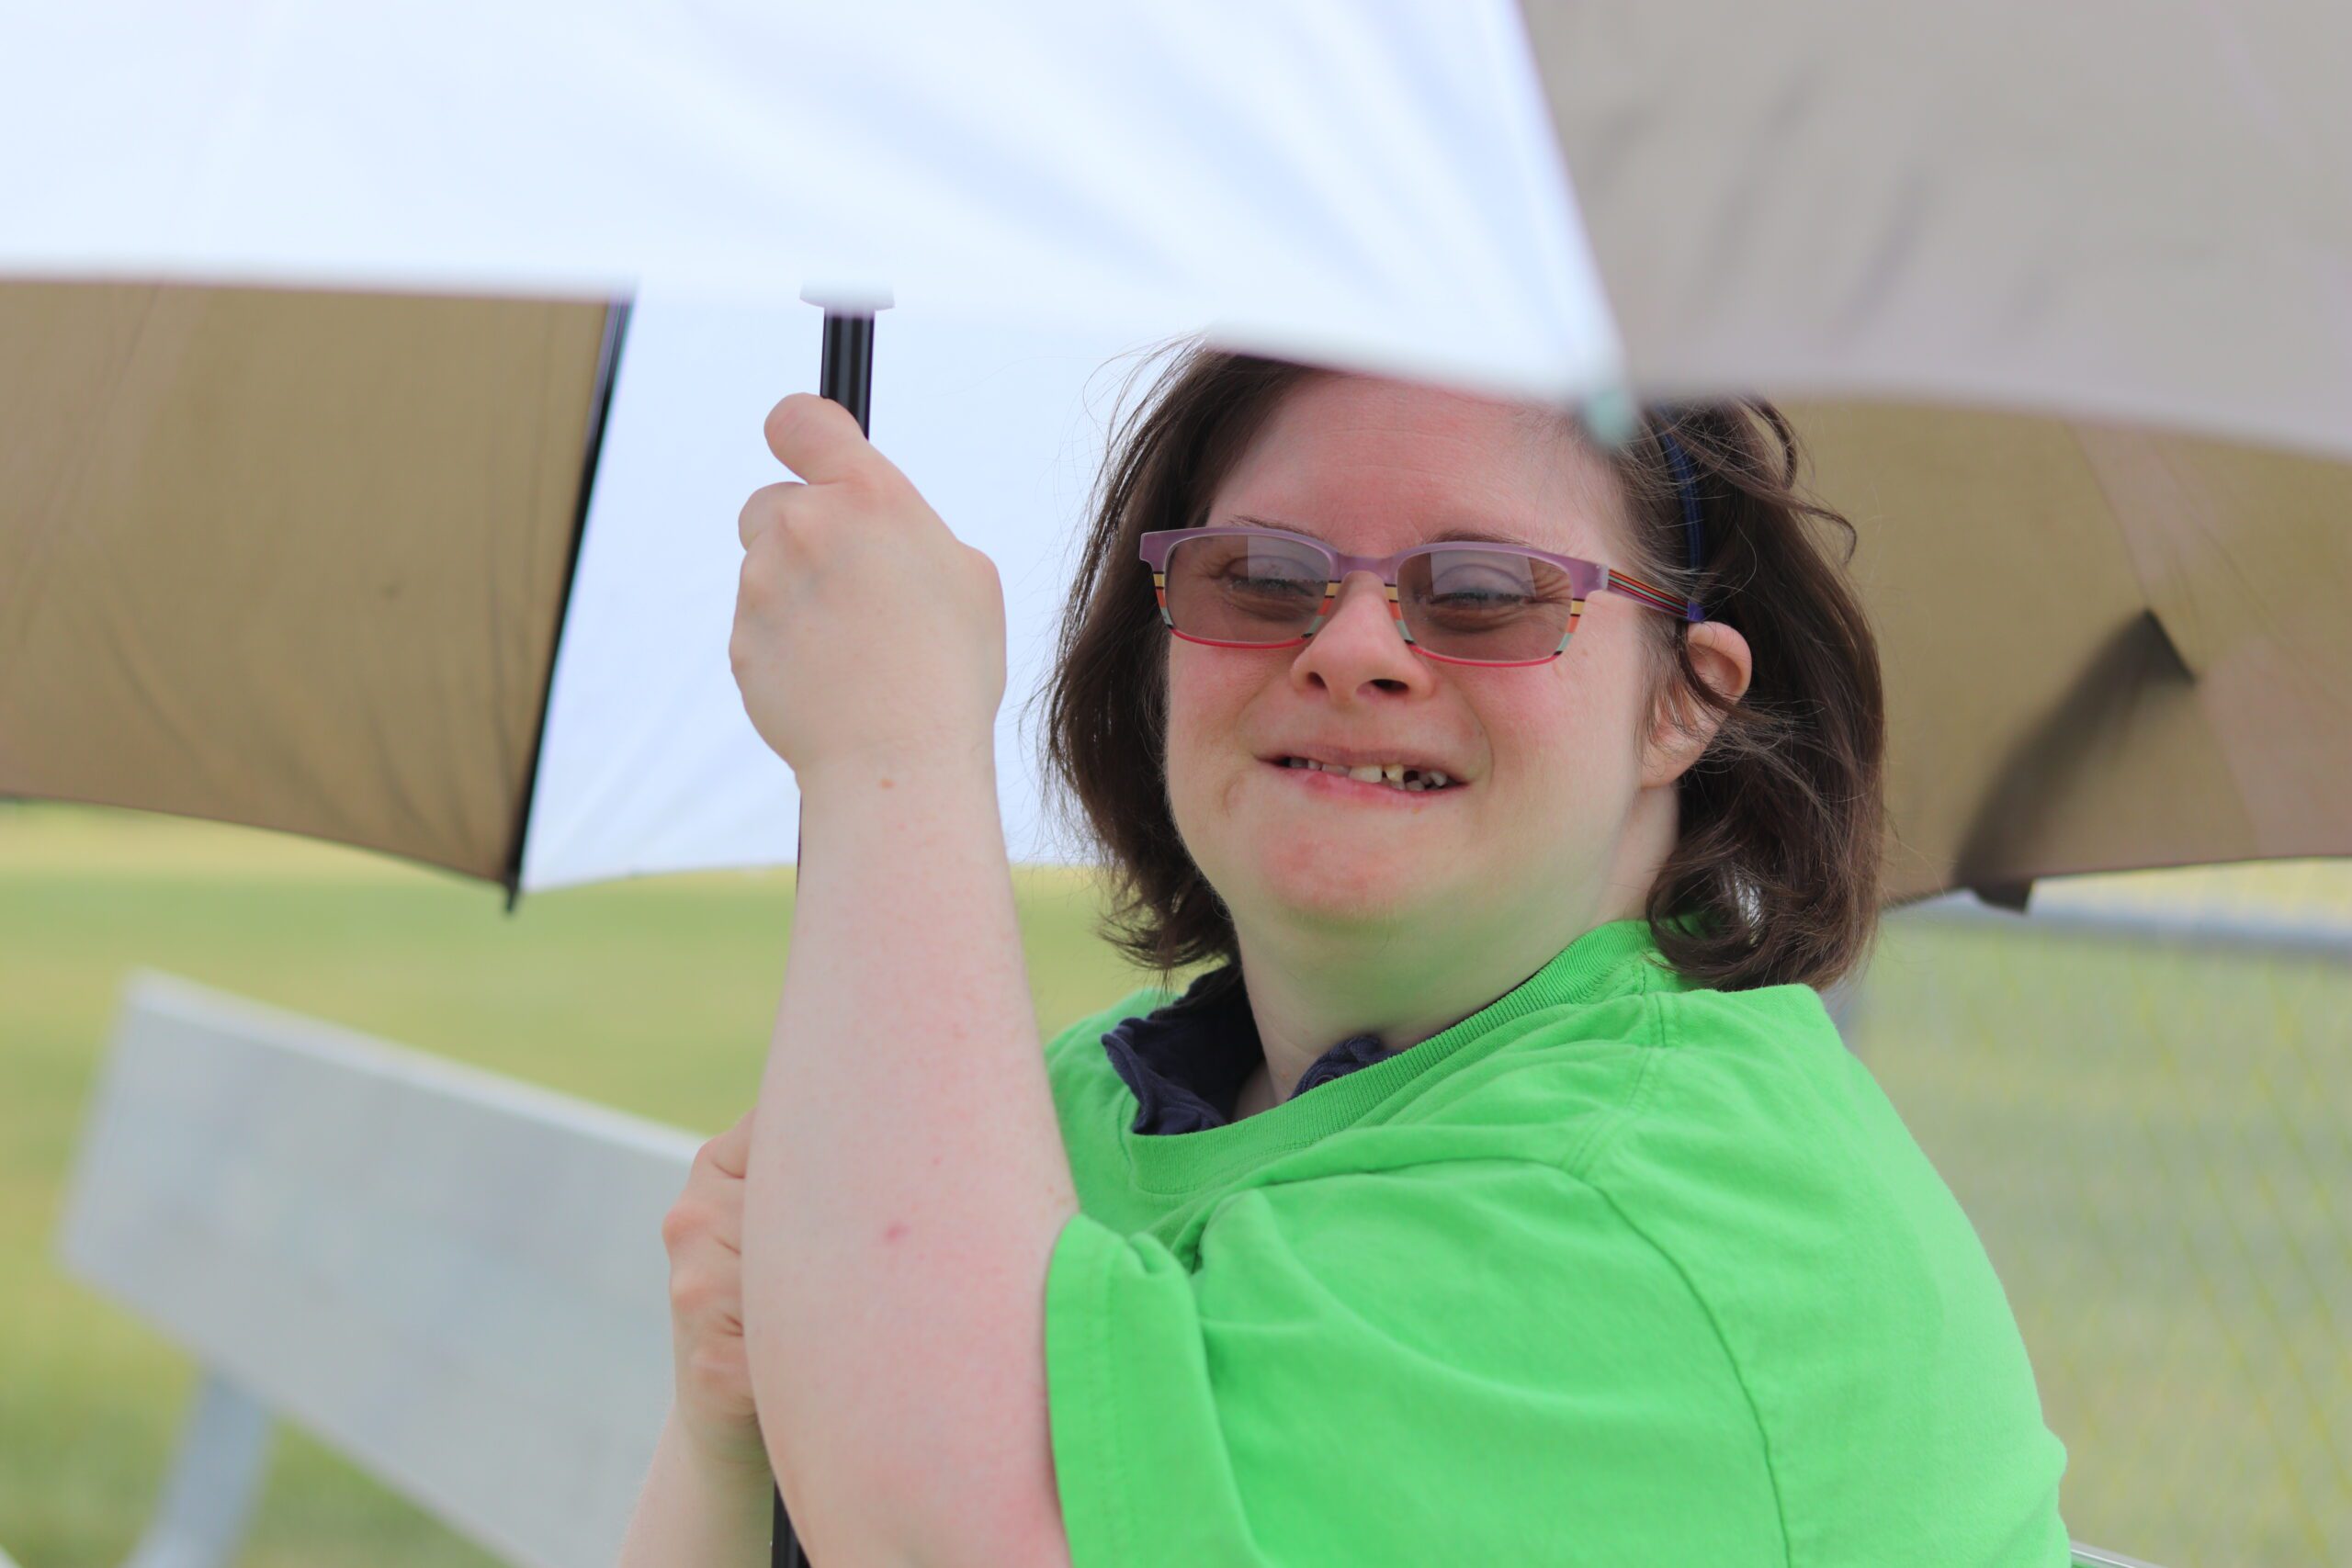 Young girl in green shirt holding an umbrella in the sun